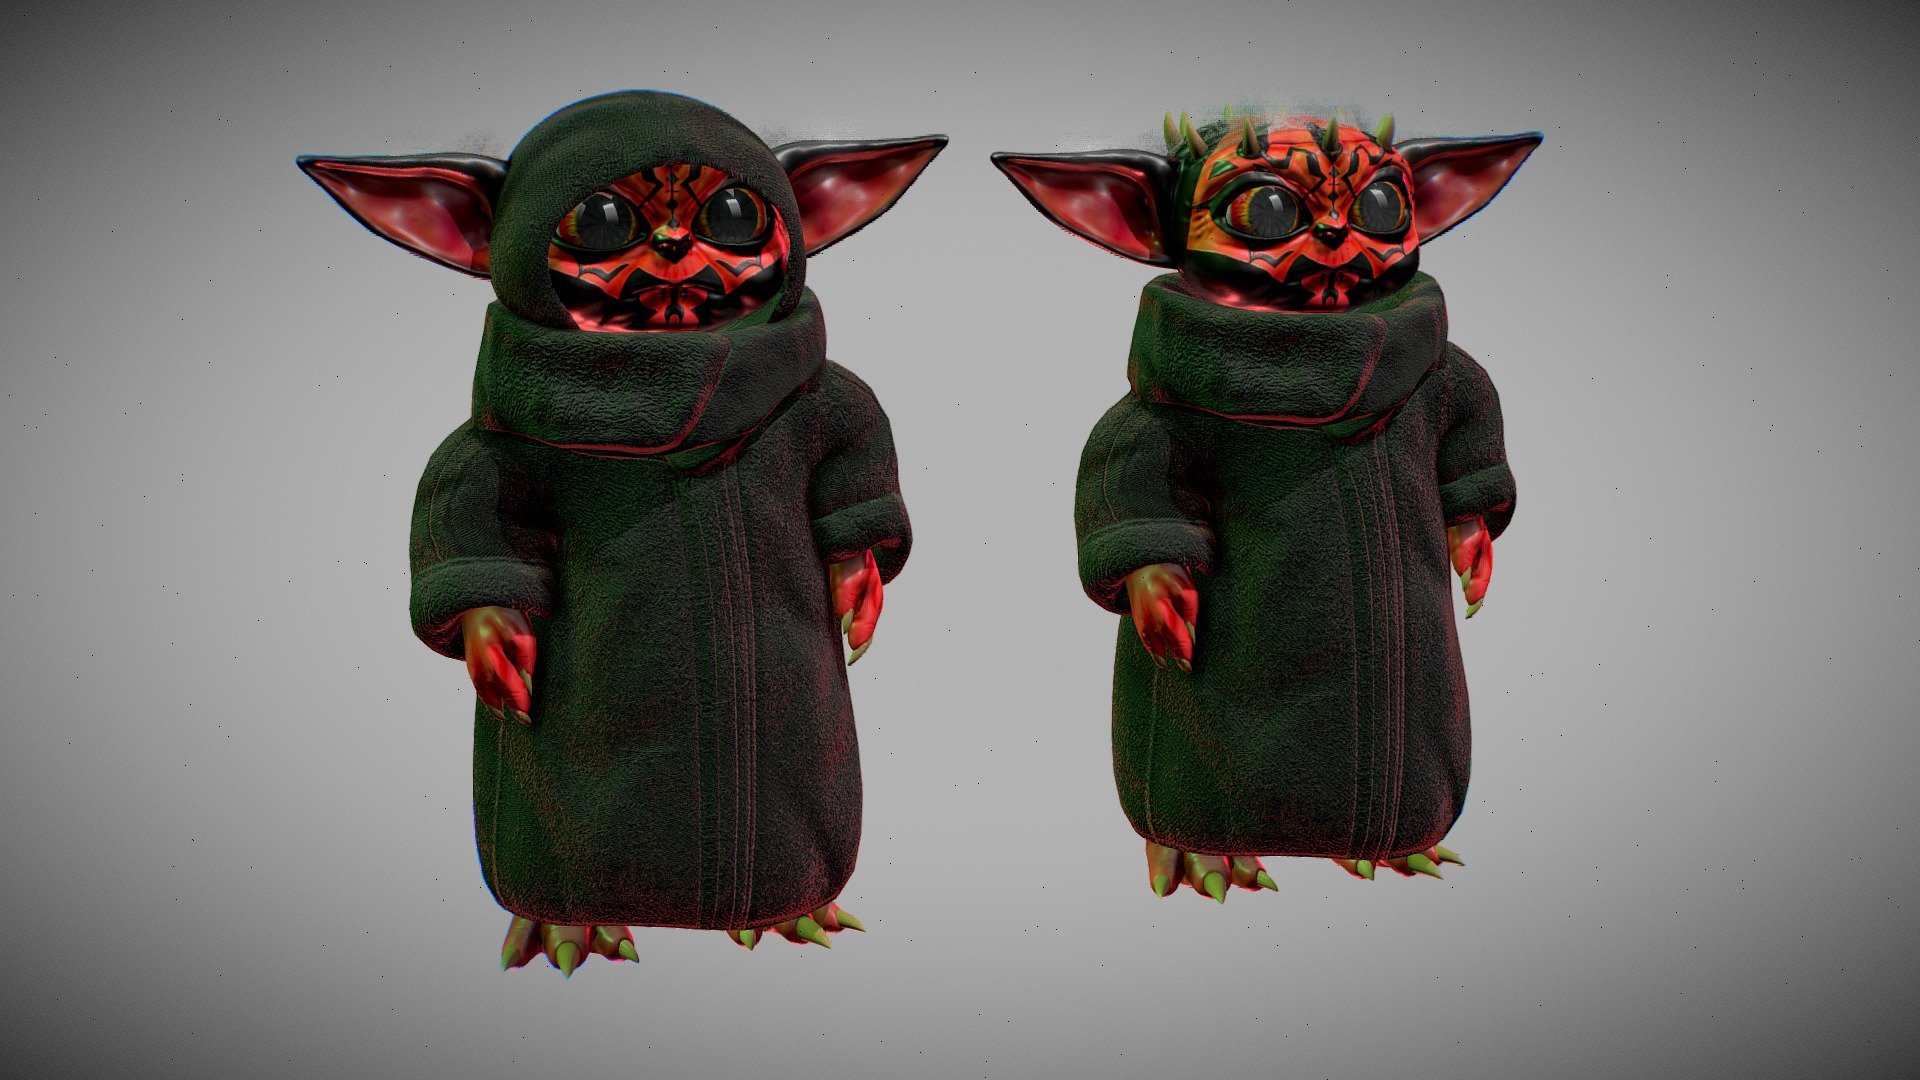 Sculpt, Retopo, UV Unwrap in Blender, Textured in Substance Painter.

Low Poly version in additional files - (8,478 Vertices, 9,582 Faces, 16,677 Triangles)

“Grogu, colloquially referred to as Baby Yoda, is a character from the Star Wars Disney+ original television series The Mandalorian. He is a toddler member of the same species as the Star Wars characters Yoda and Yaddle, with whom he shares a strong ability in the Force.”

Links to social media and support: https://linktr.ee/tikodev

Get exclusive models and support me: patreon.com/tiko - Darth Grogu - Buy Royalty Free 3D model by Tiko (@tikoavp) 3d model